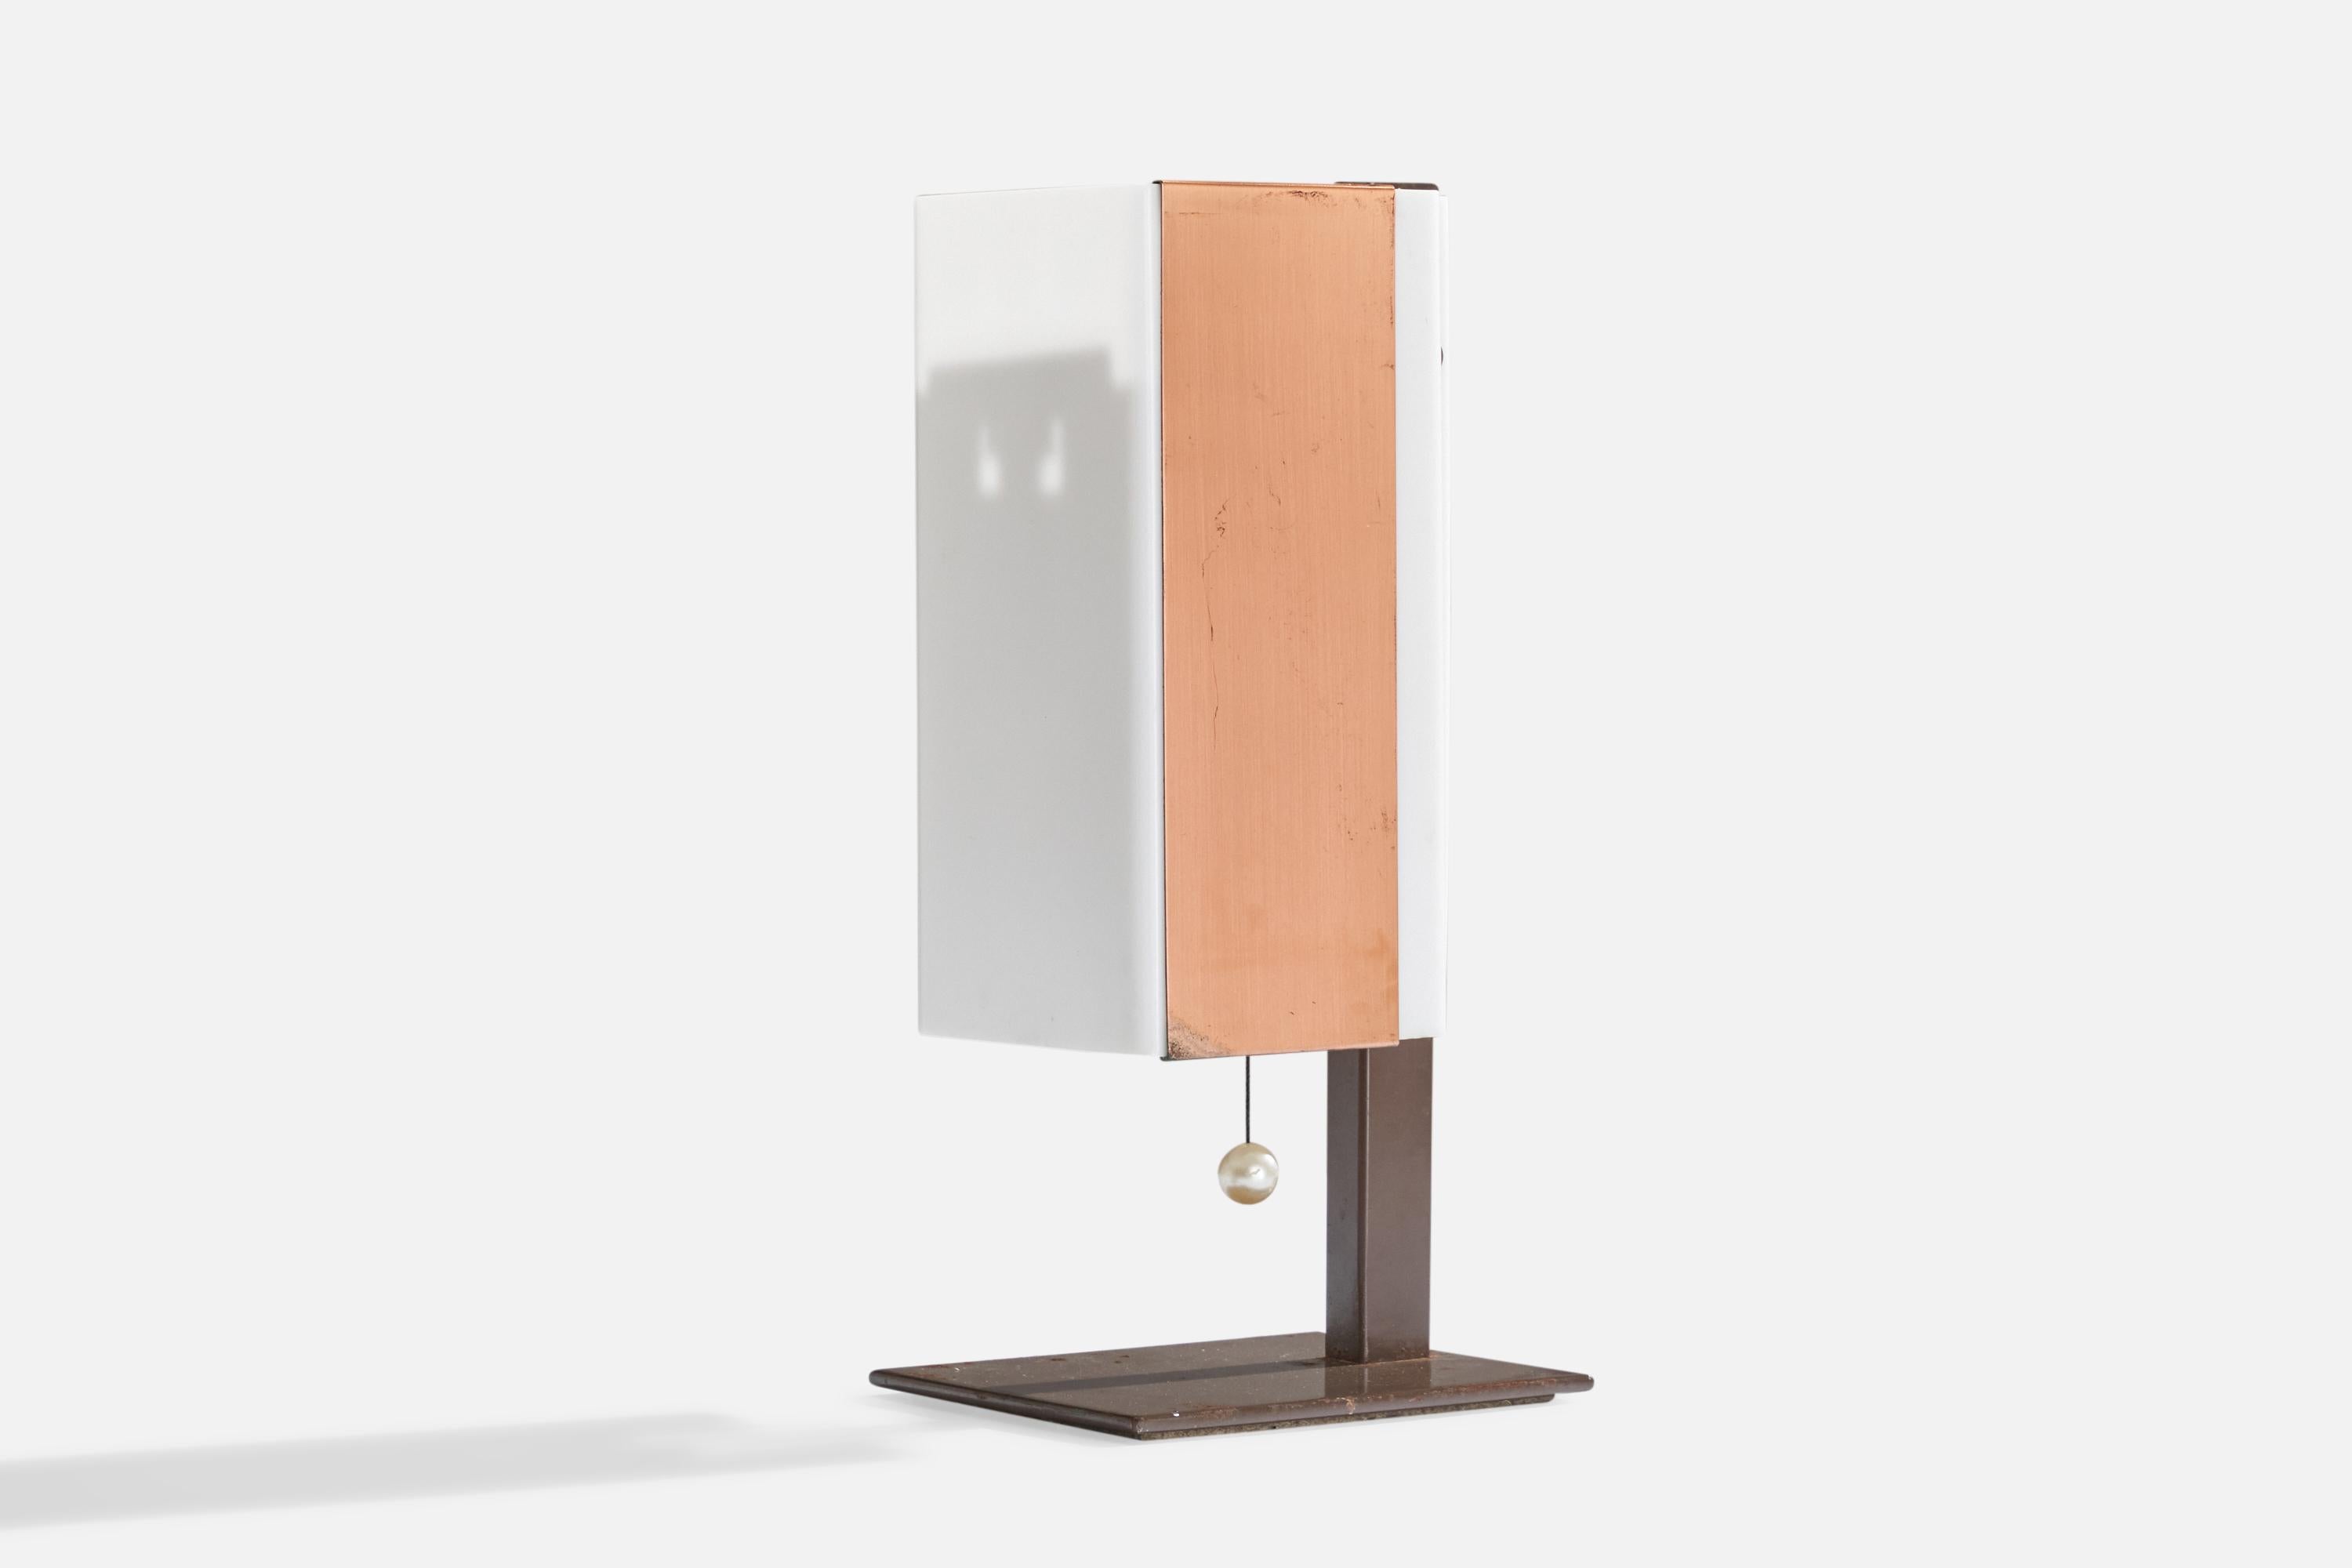 A brown-lacquered metal, white acrylic and copper table lamp designed by Lars-Gunnar Nordström and produced by Metallimestarit, Finland, 1970s.

Overall Dimensions (inches): 14.75” H x 4.75” W x 6.25” D
Stated dimensions include shade.
Bulb